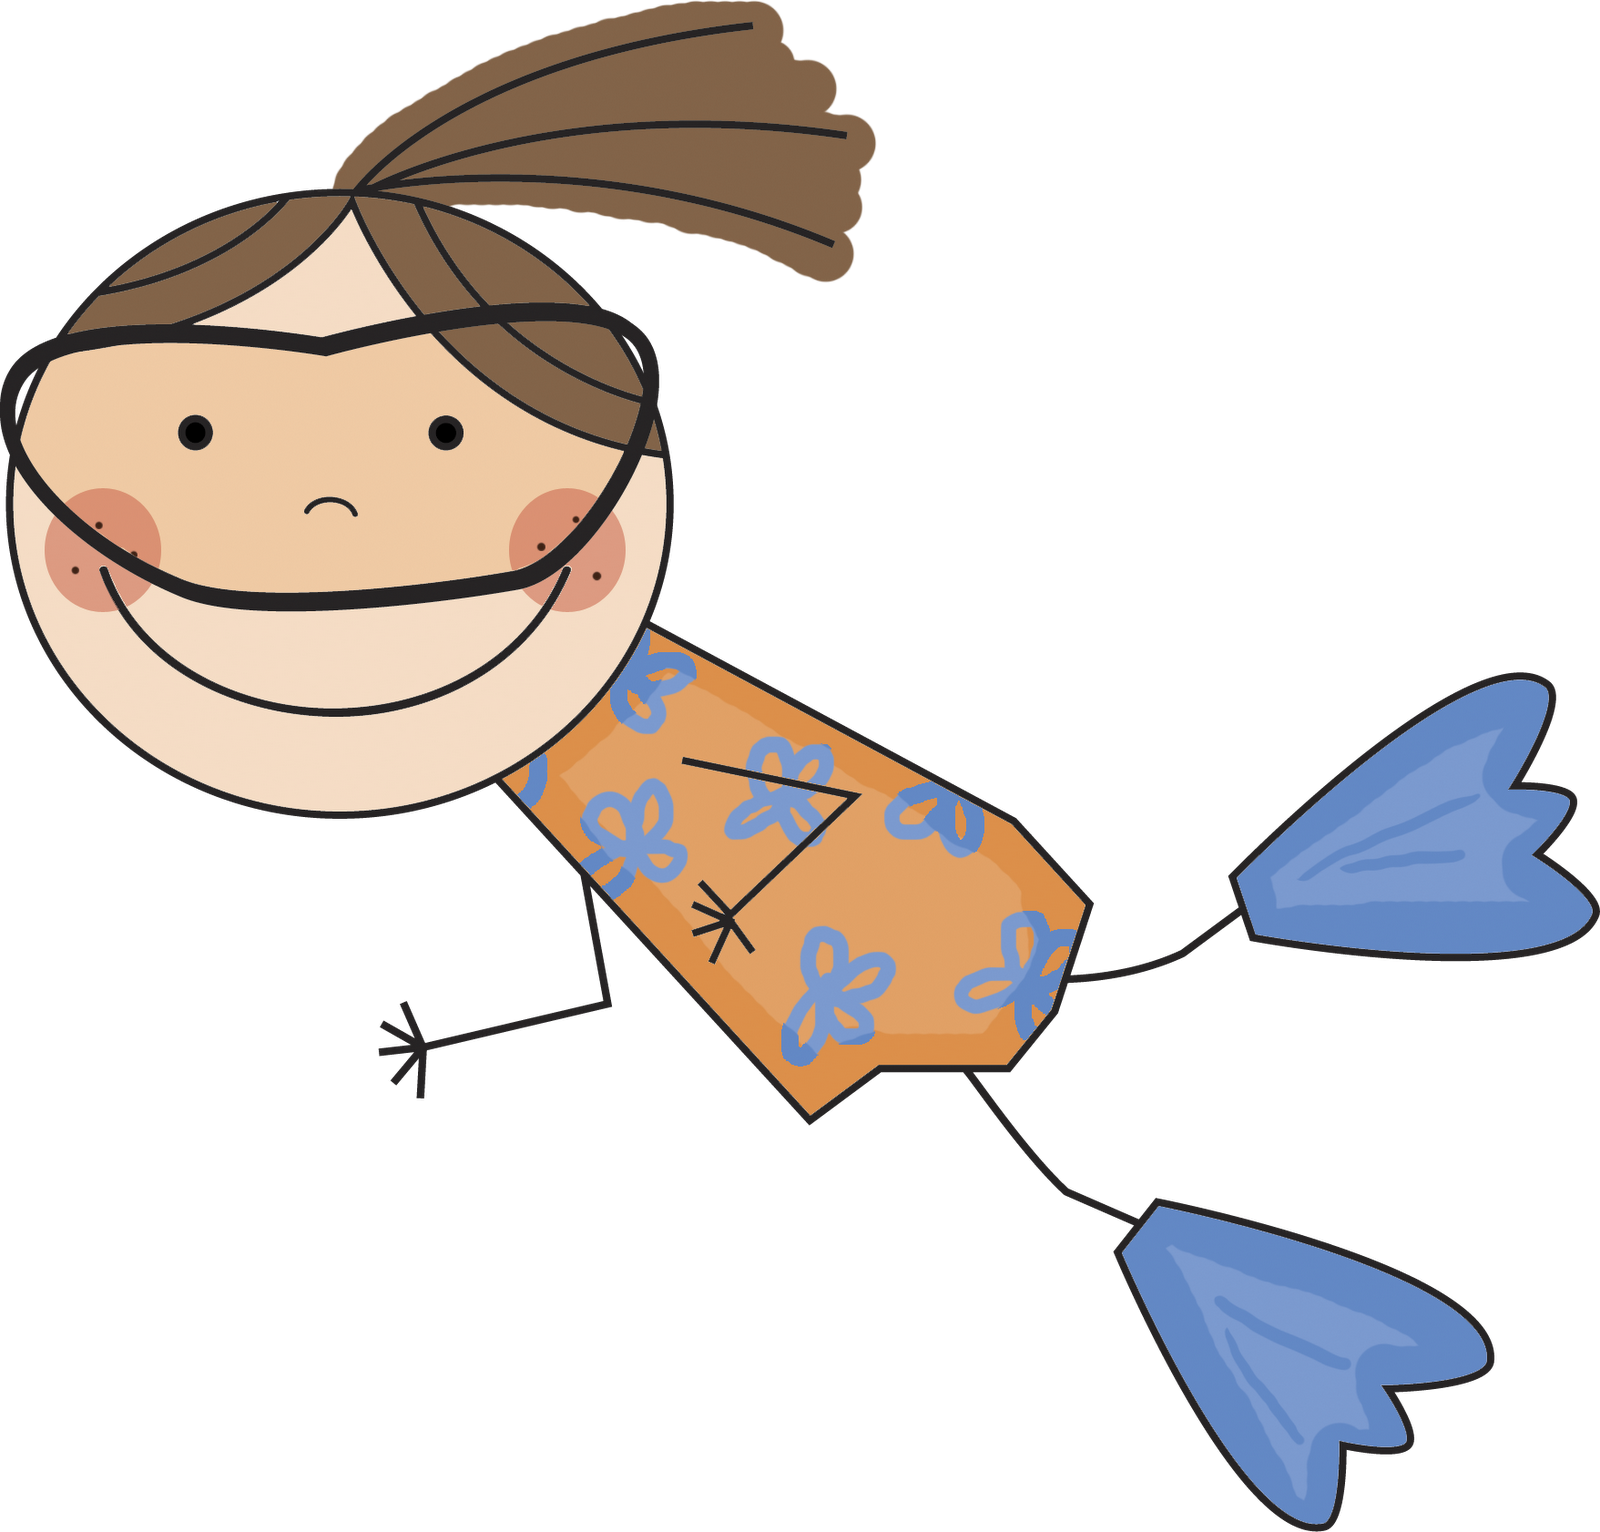 Swimmer clipart swimming tog. Busy bees june i